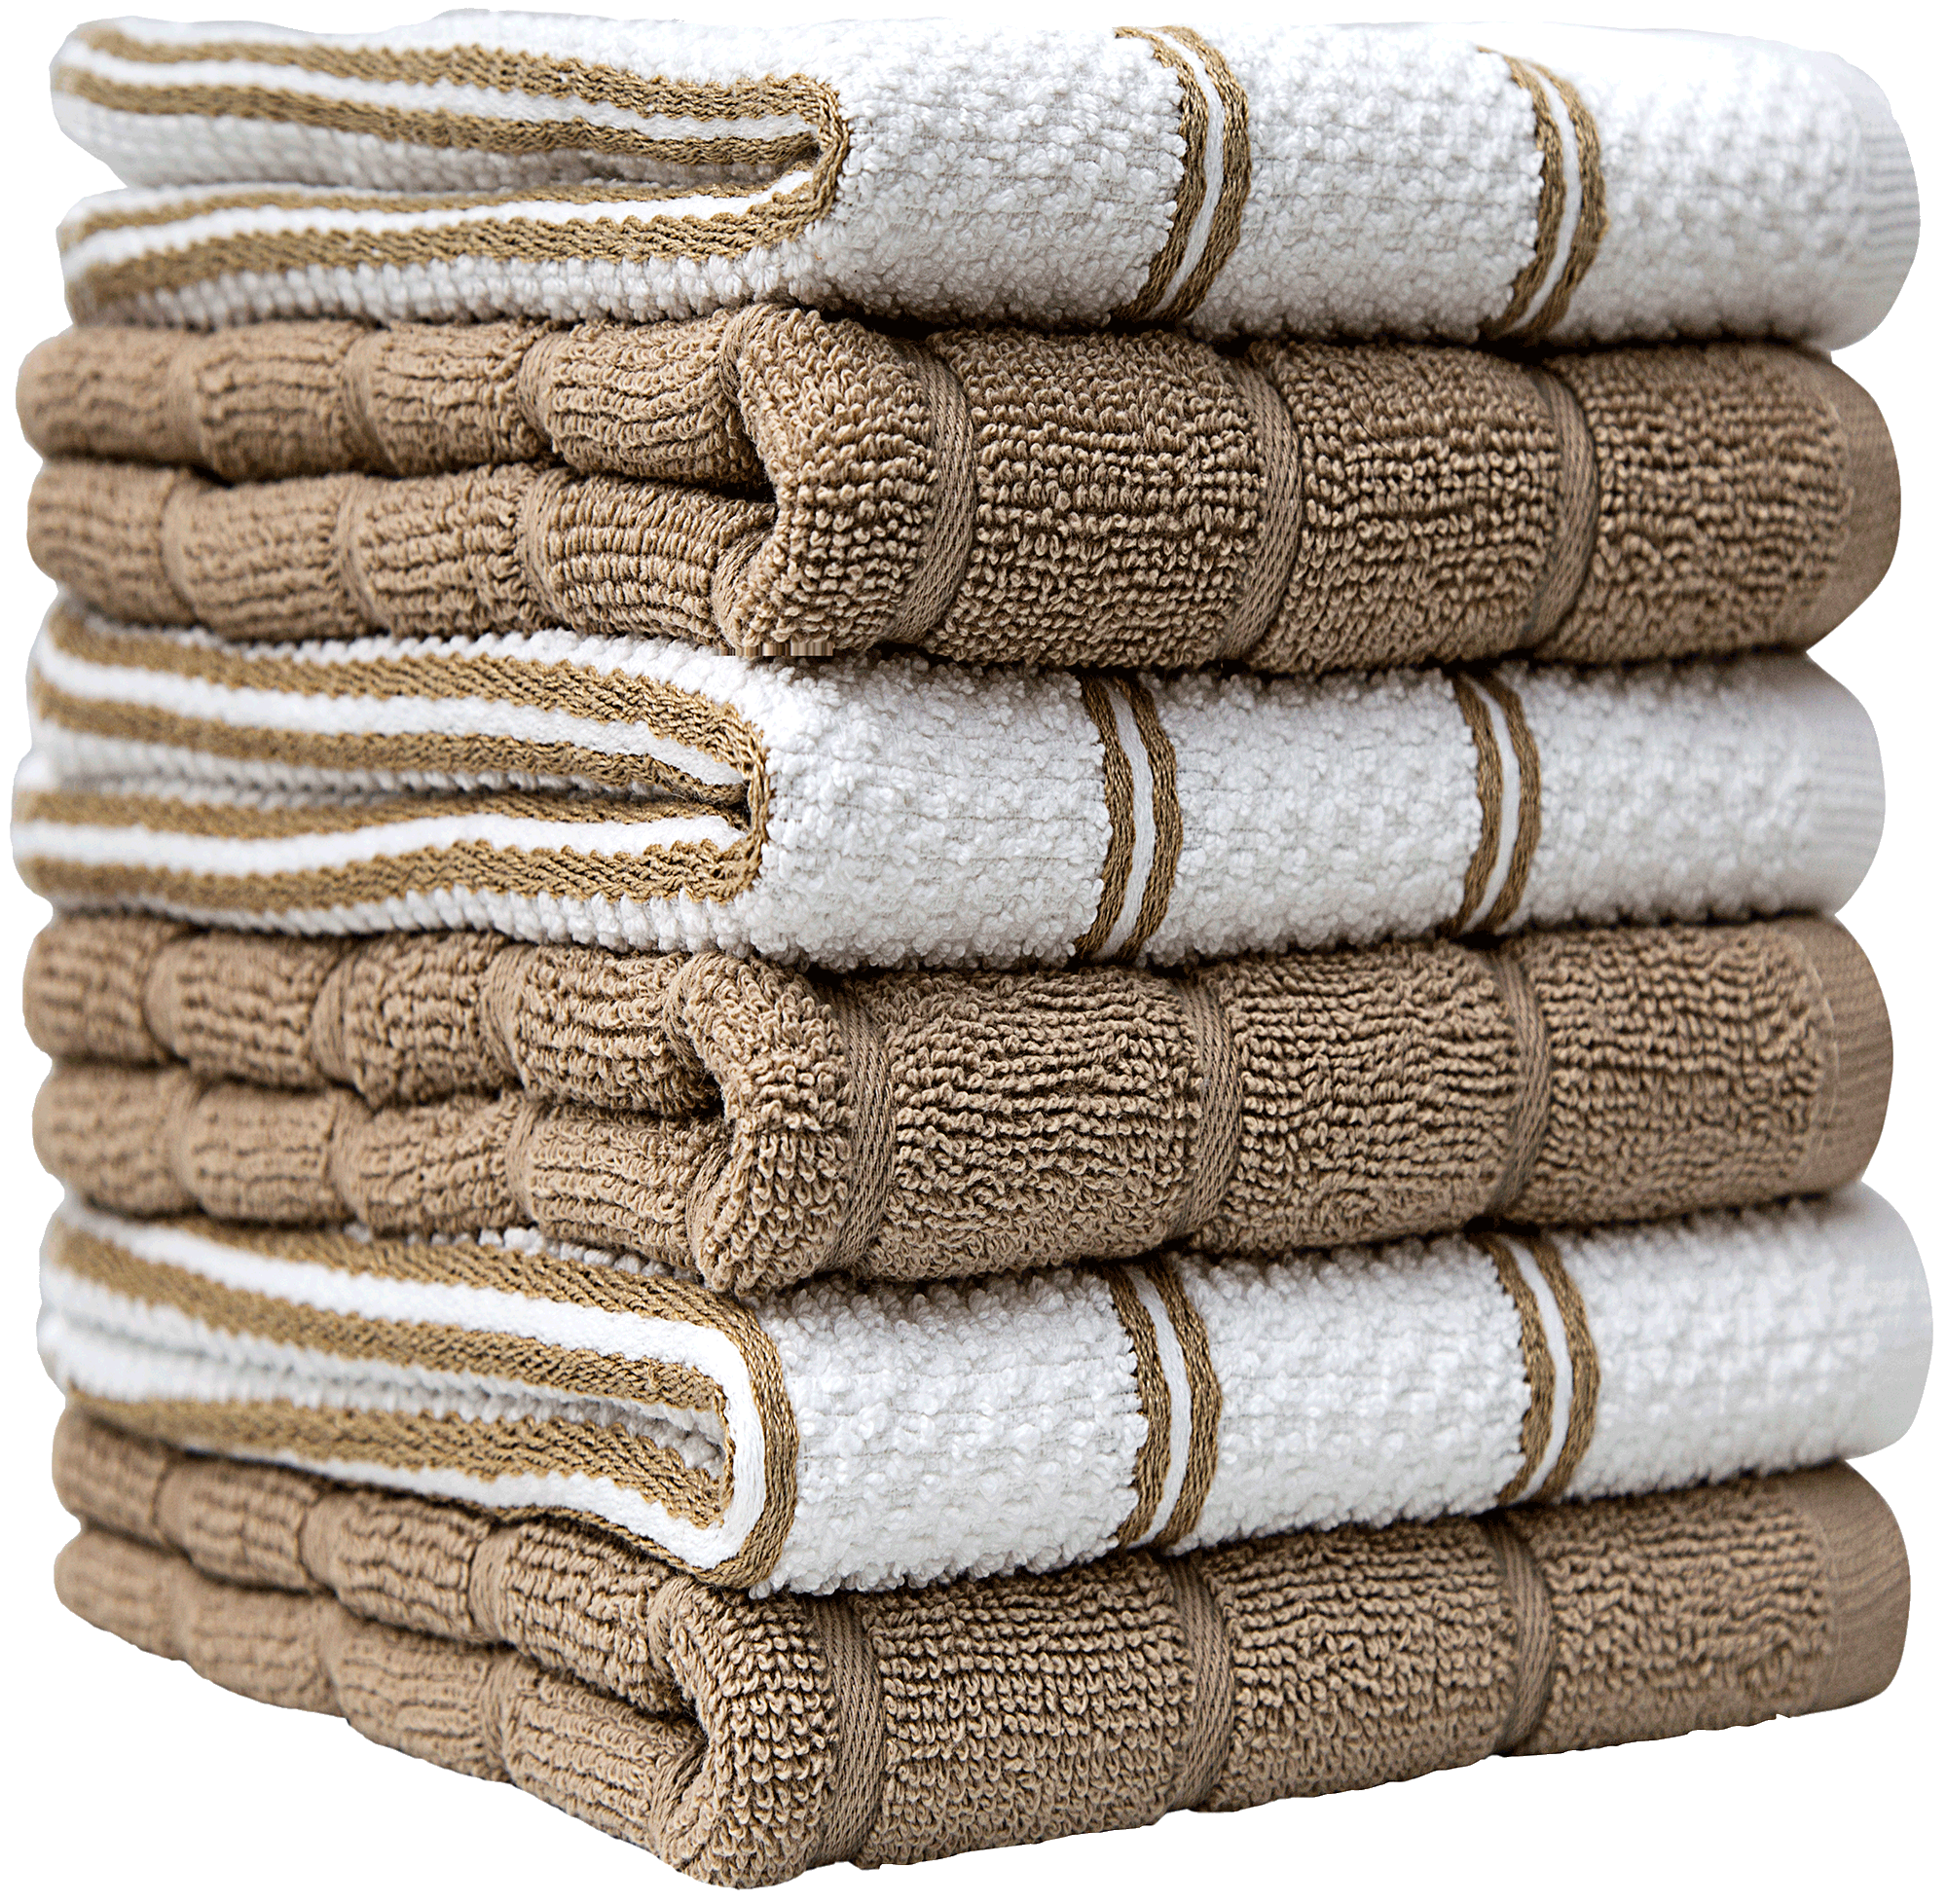 Kitchen Hand Towels 16x 28 | Red Popcorn Gird Design | Kitchen Towel Set  | Soft, Highly Absorbent with Hanging Loop | Natural Ring Spun Cotton